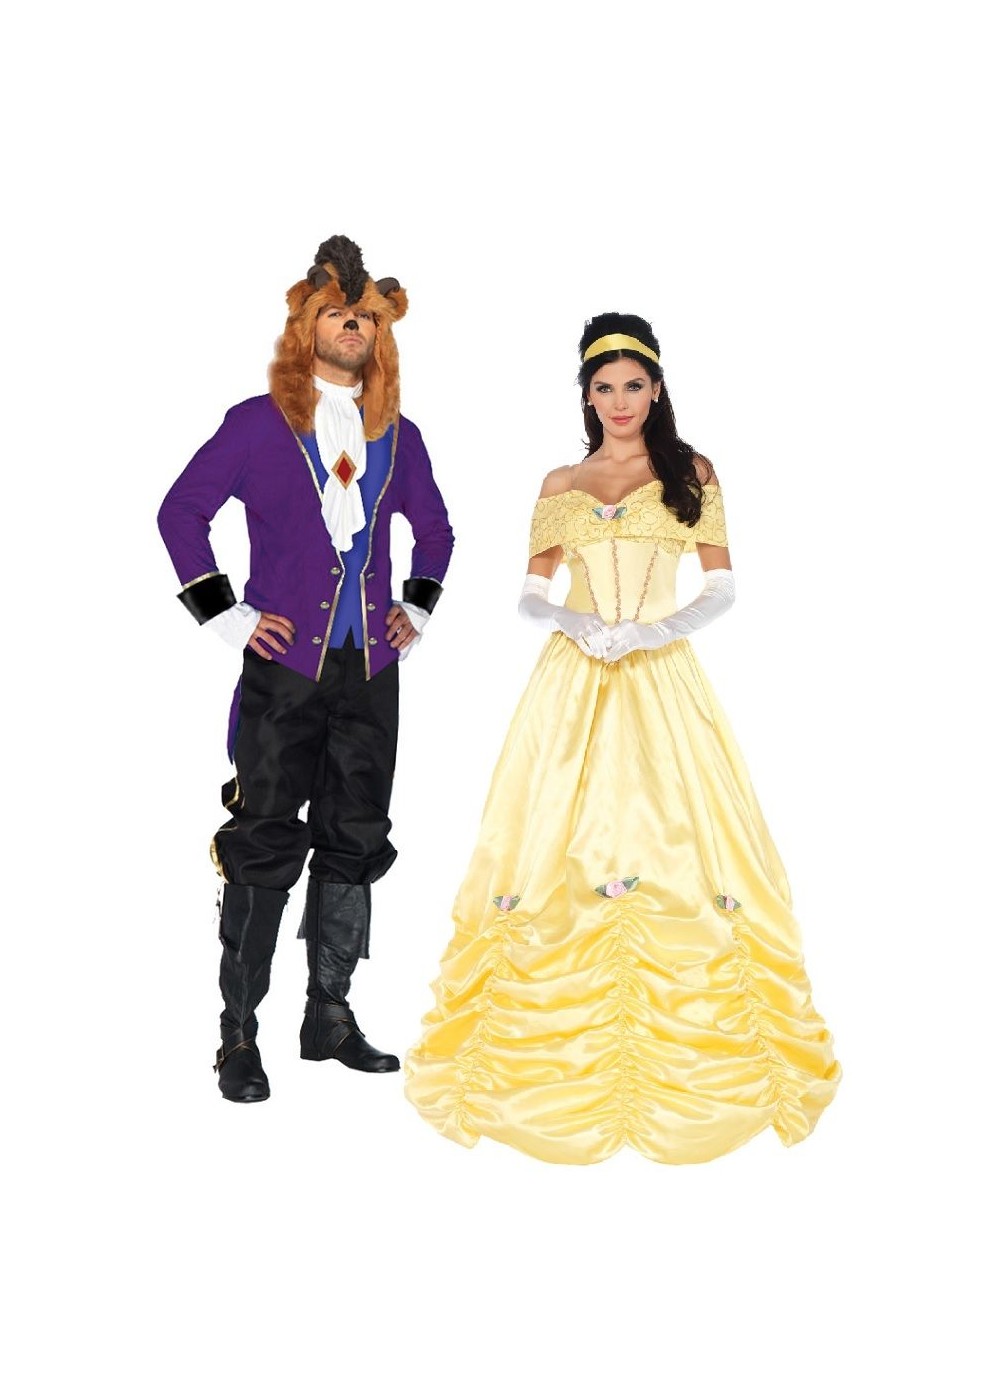 Beauty And The Beast Costume Couple Kit